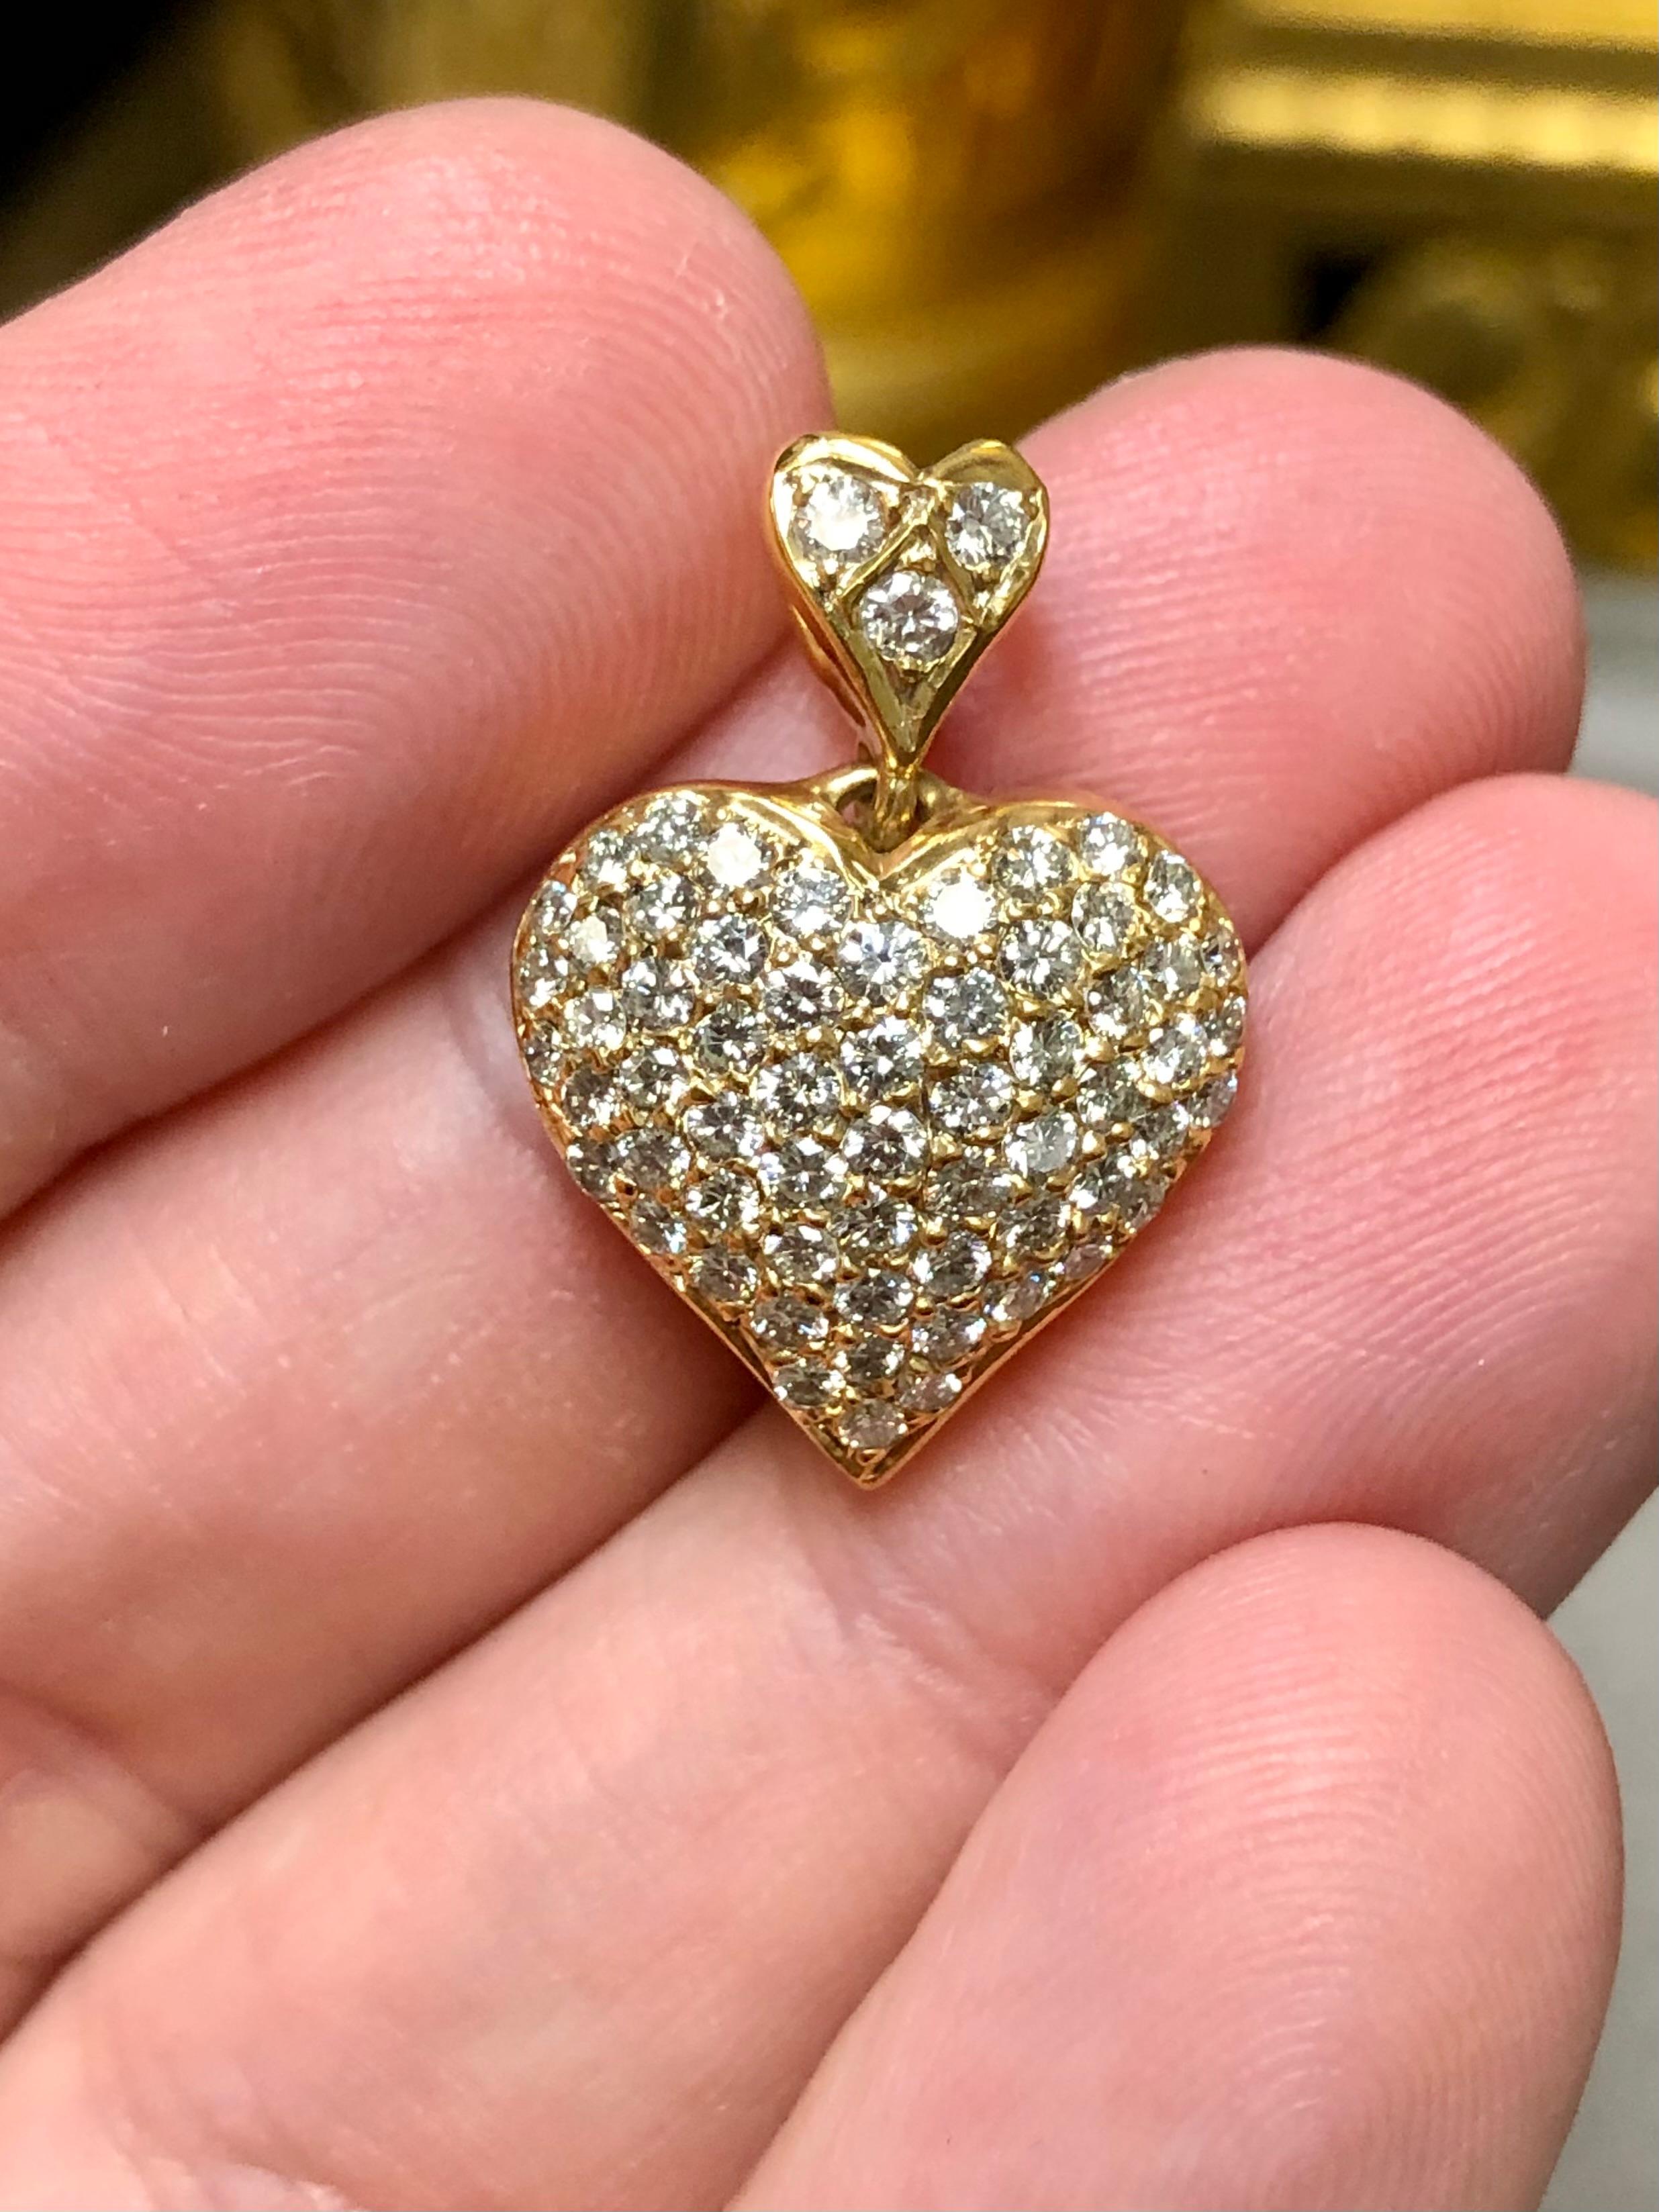 
A nicely done classic heart pendant crafted in deep 18K yellow gold and set with approximately 2cttw in G-H color Vs1 clarity round diamonds. Absolutely no excuses to be a made here!


Dimensions/Weight:

Pendant measures .95” by .65” and weighs